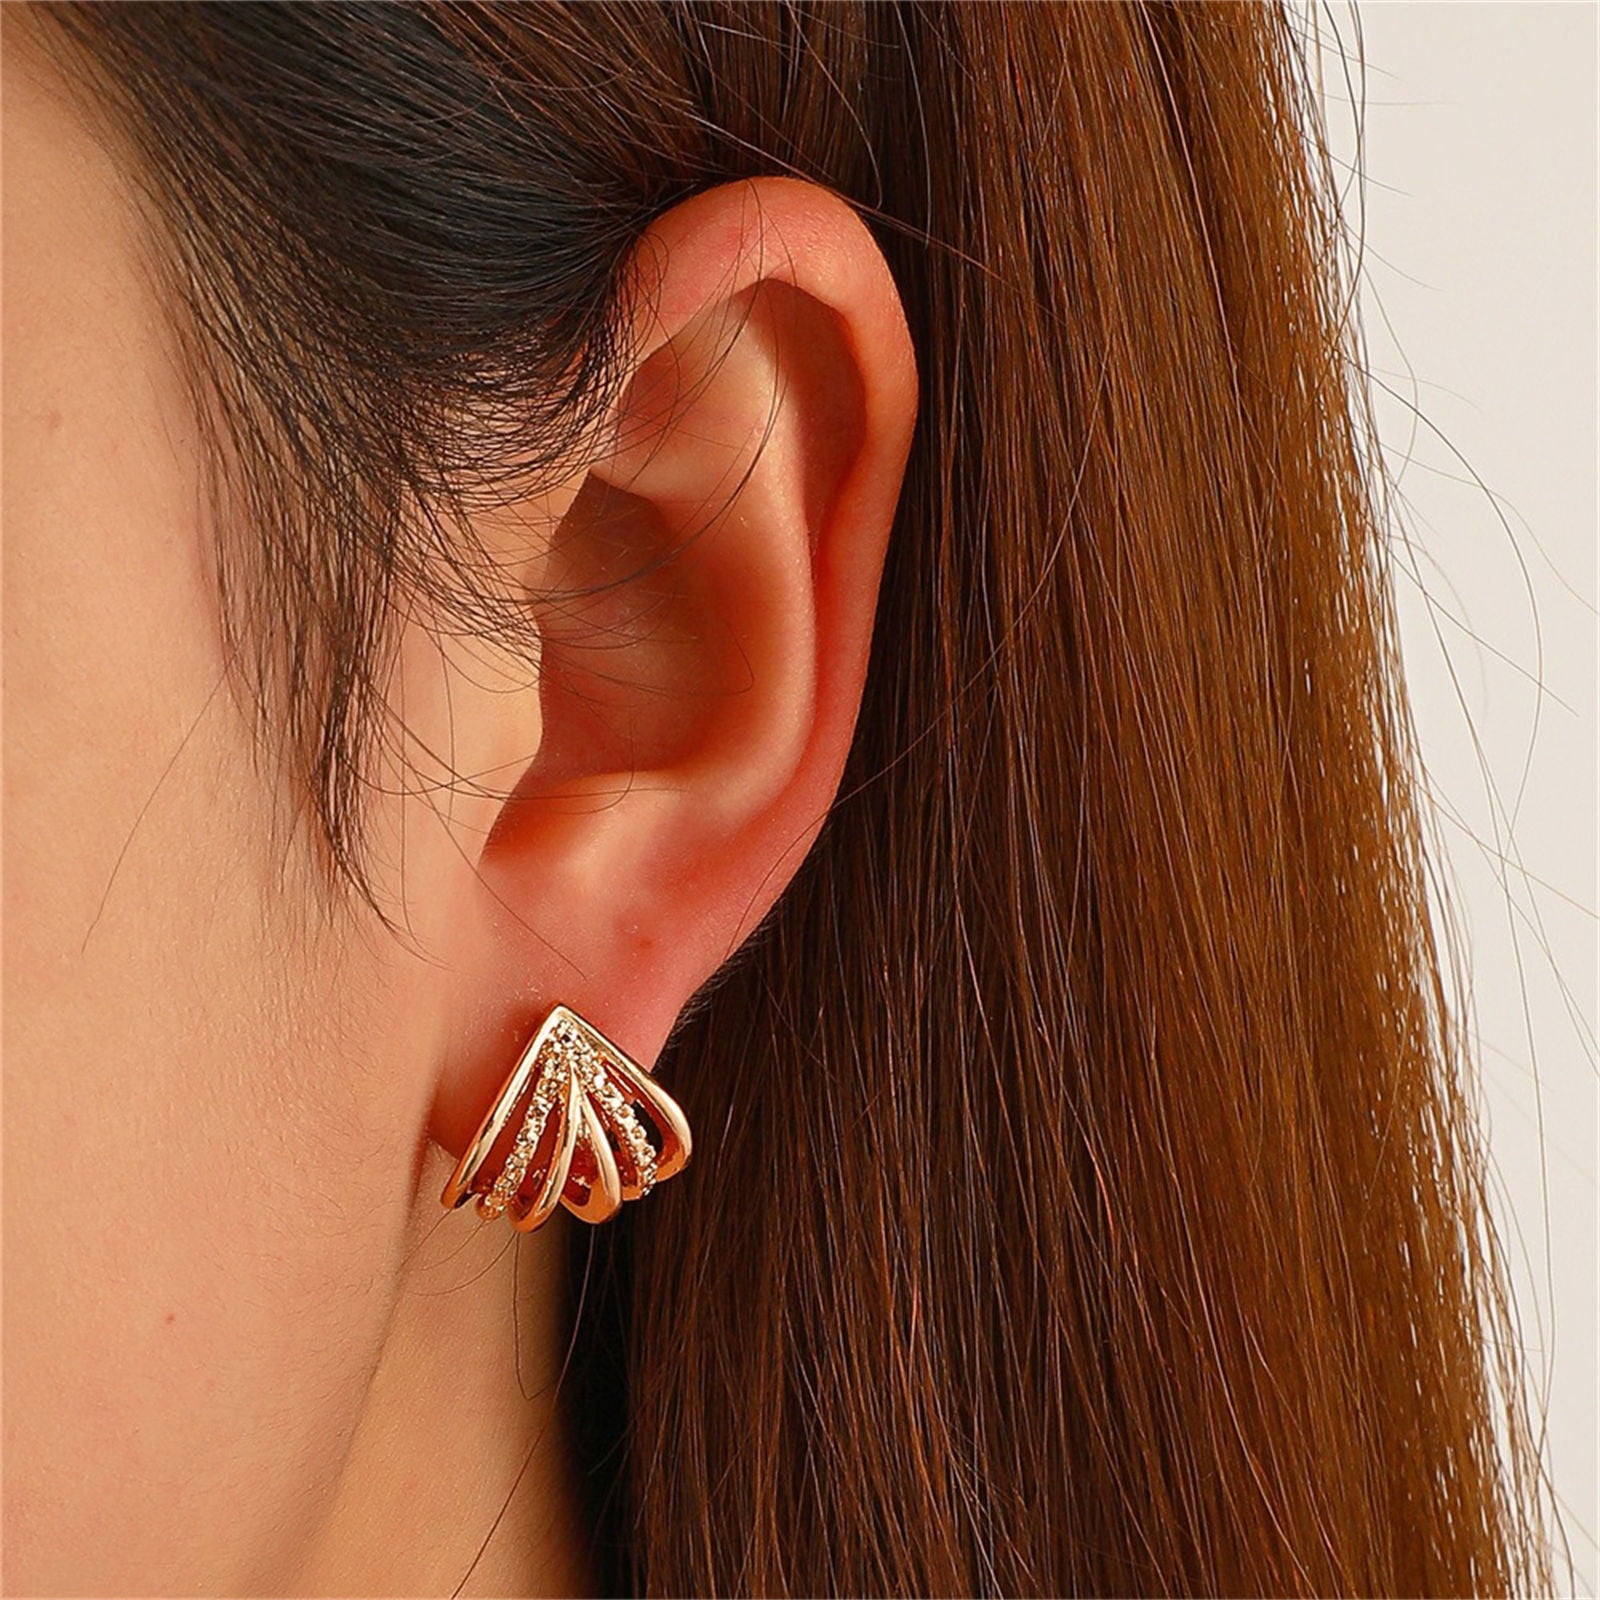 Trendy Copper C Shape Stud Earrings Simulated Pearl Twisted Temperament Chic Jewelry Party